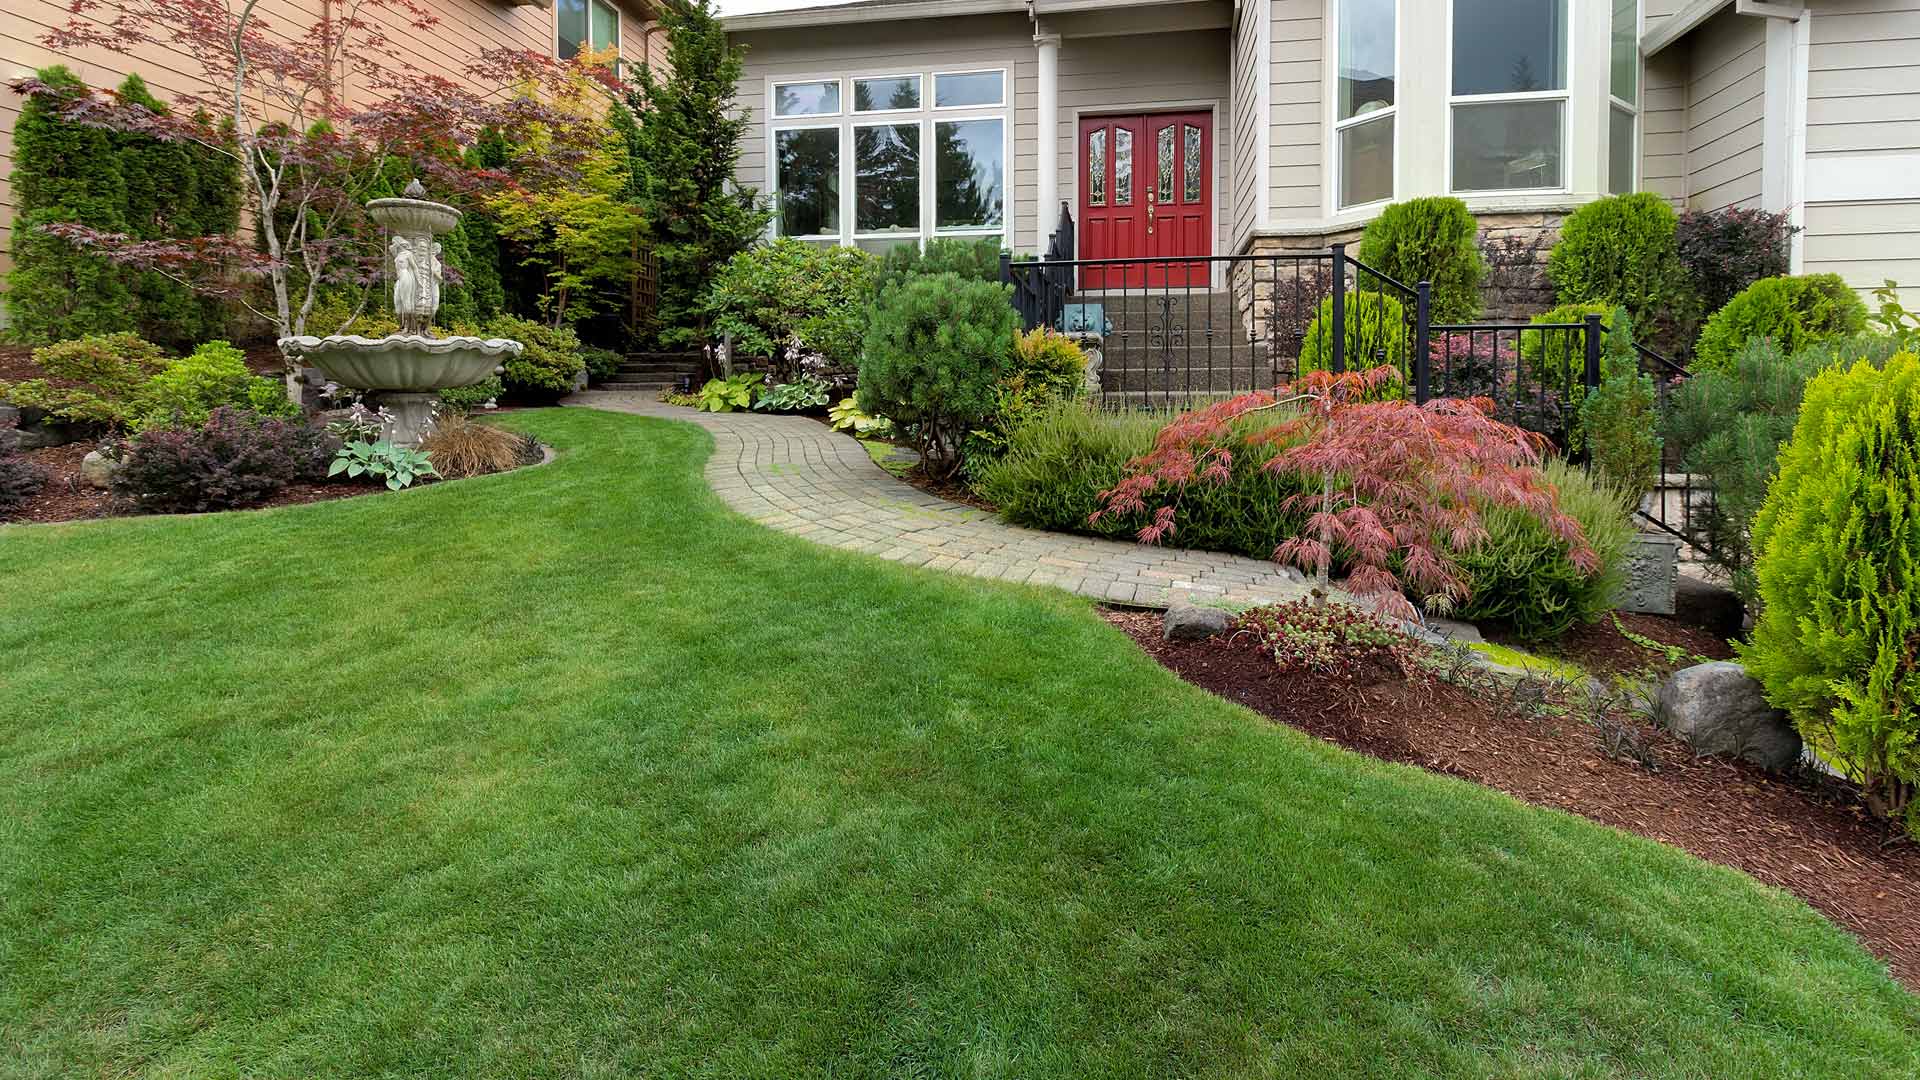 A healthy and maintained lawn for a home front in New Hope, PA.